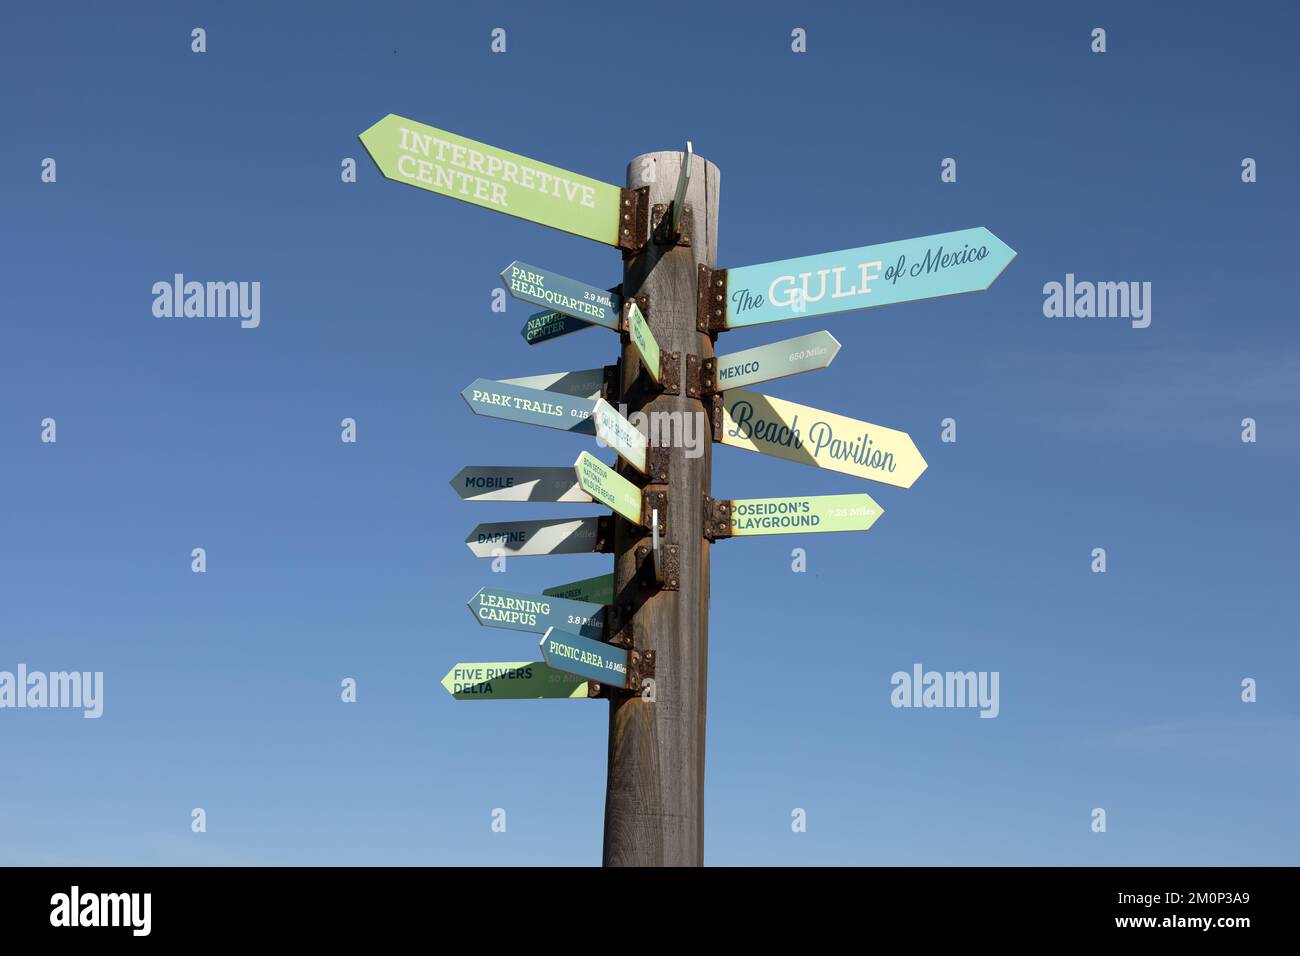 Sign Posts To Attractions In Gulf State Park Alabama United States Signposts To Areas Of The State Park On The Shores Of The Guld Of Mexico. Stock Photo